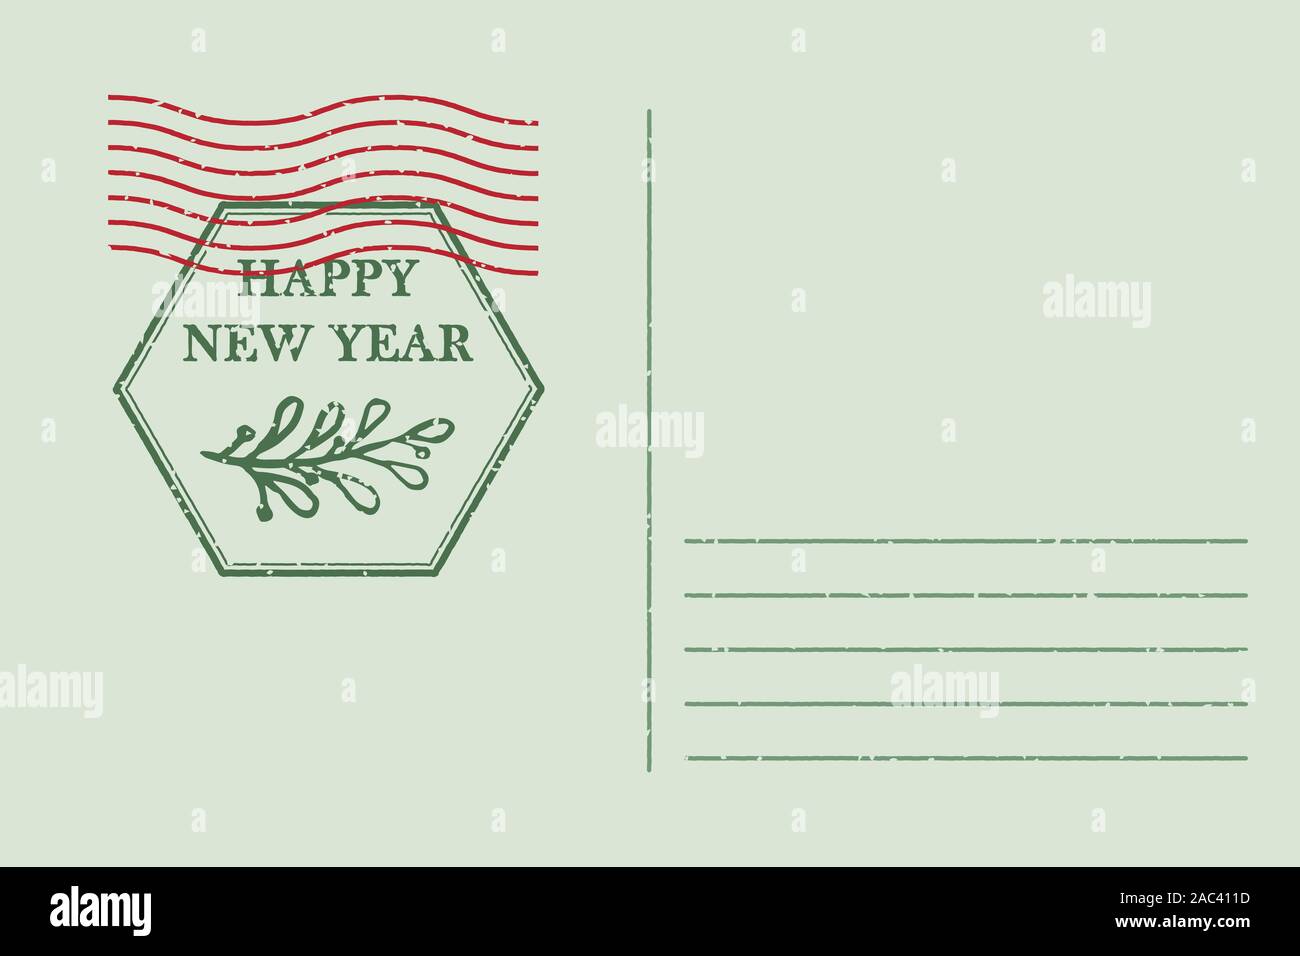 Template of vintage air mail postcard and envelope. Texture grunge christmas stamp rubber with holiday symbols in traditional colors. Place for your Stock Vector